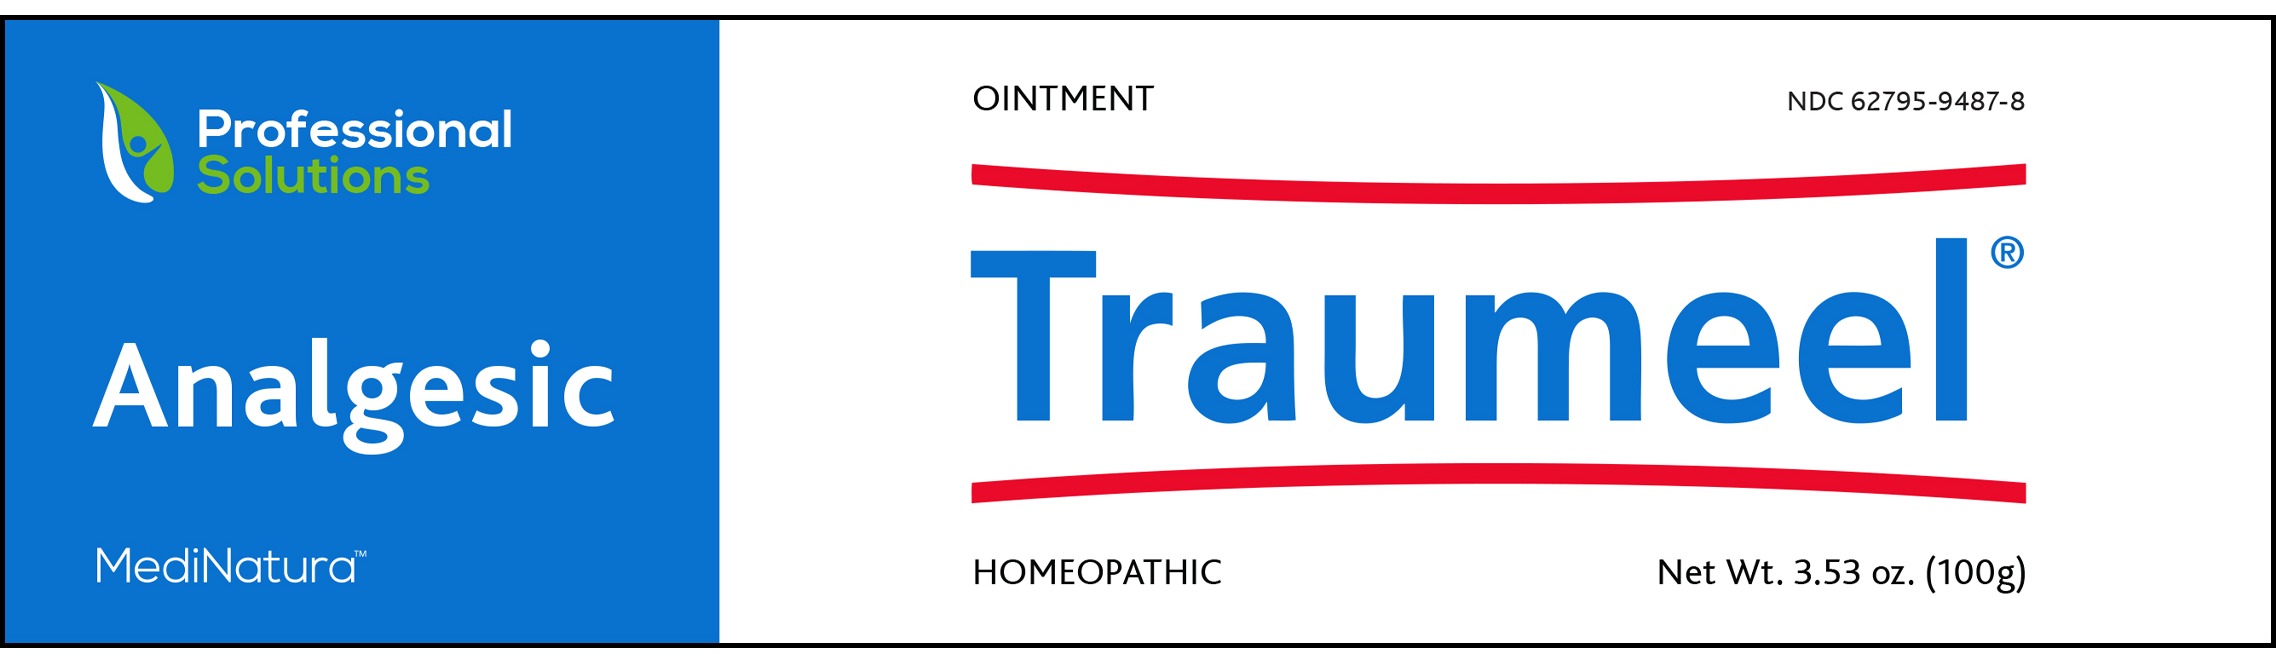 Traumeel Ointment 100g NDC